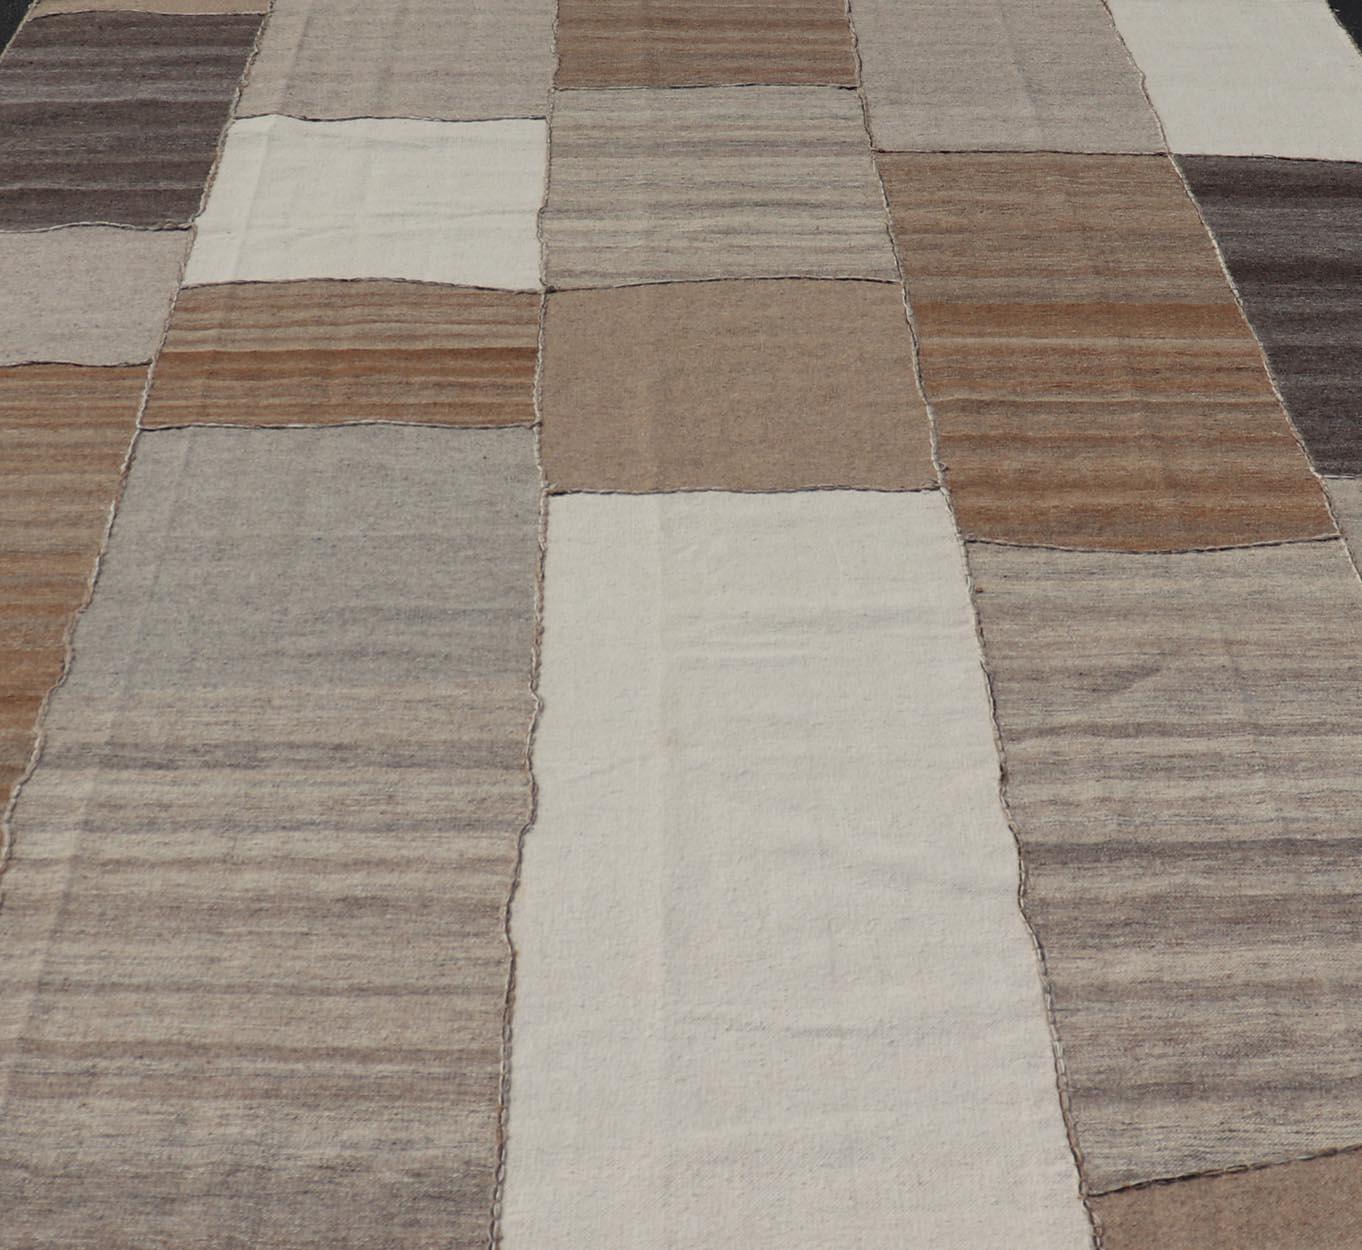 Modern Kilim Rug in Multi-Panel Striped Design with Brown, Gray, White and Taupe. Keivan Woven Arts / rug RSC-76609-HS-04, country of origin / type: India / Kilim 21st Century. 
Measures: 9'2 x 11'10 
This flat-woven kilim rug features a paneled